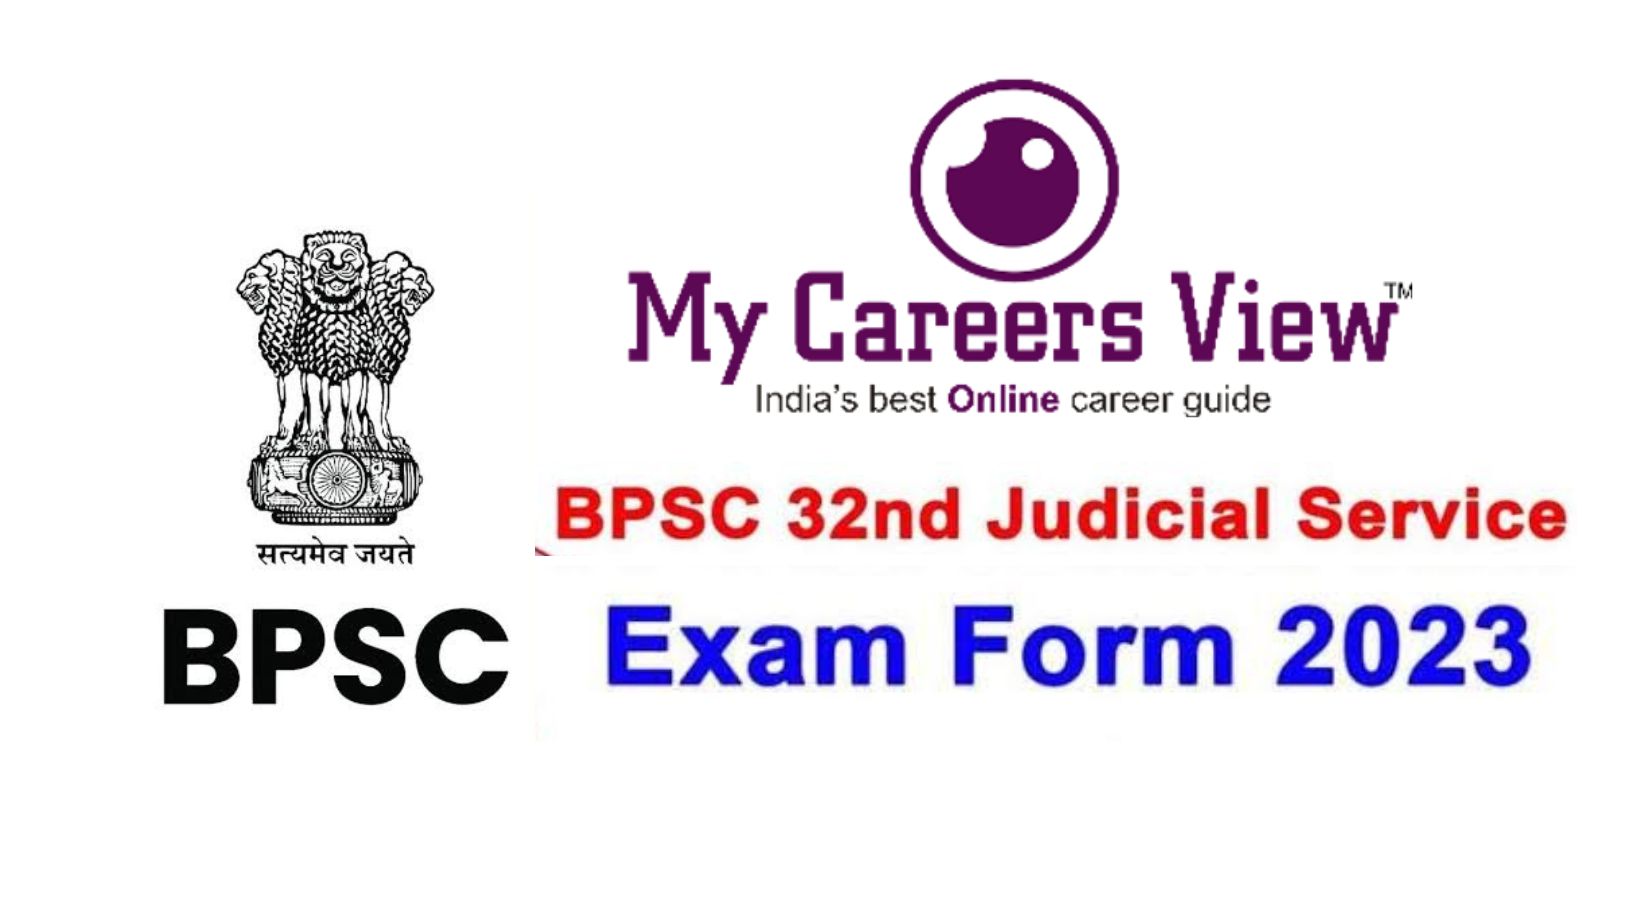 The Ultimate Guide to BPSC Syllabus: Everything You Need to Know to Ace the  Exam